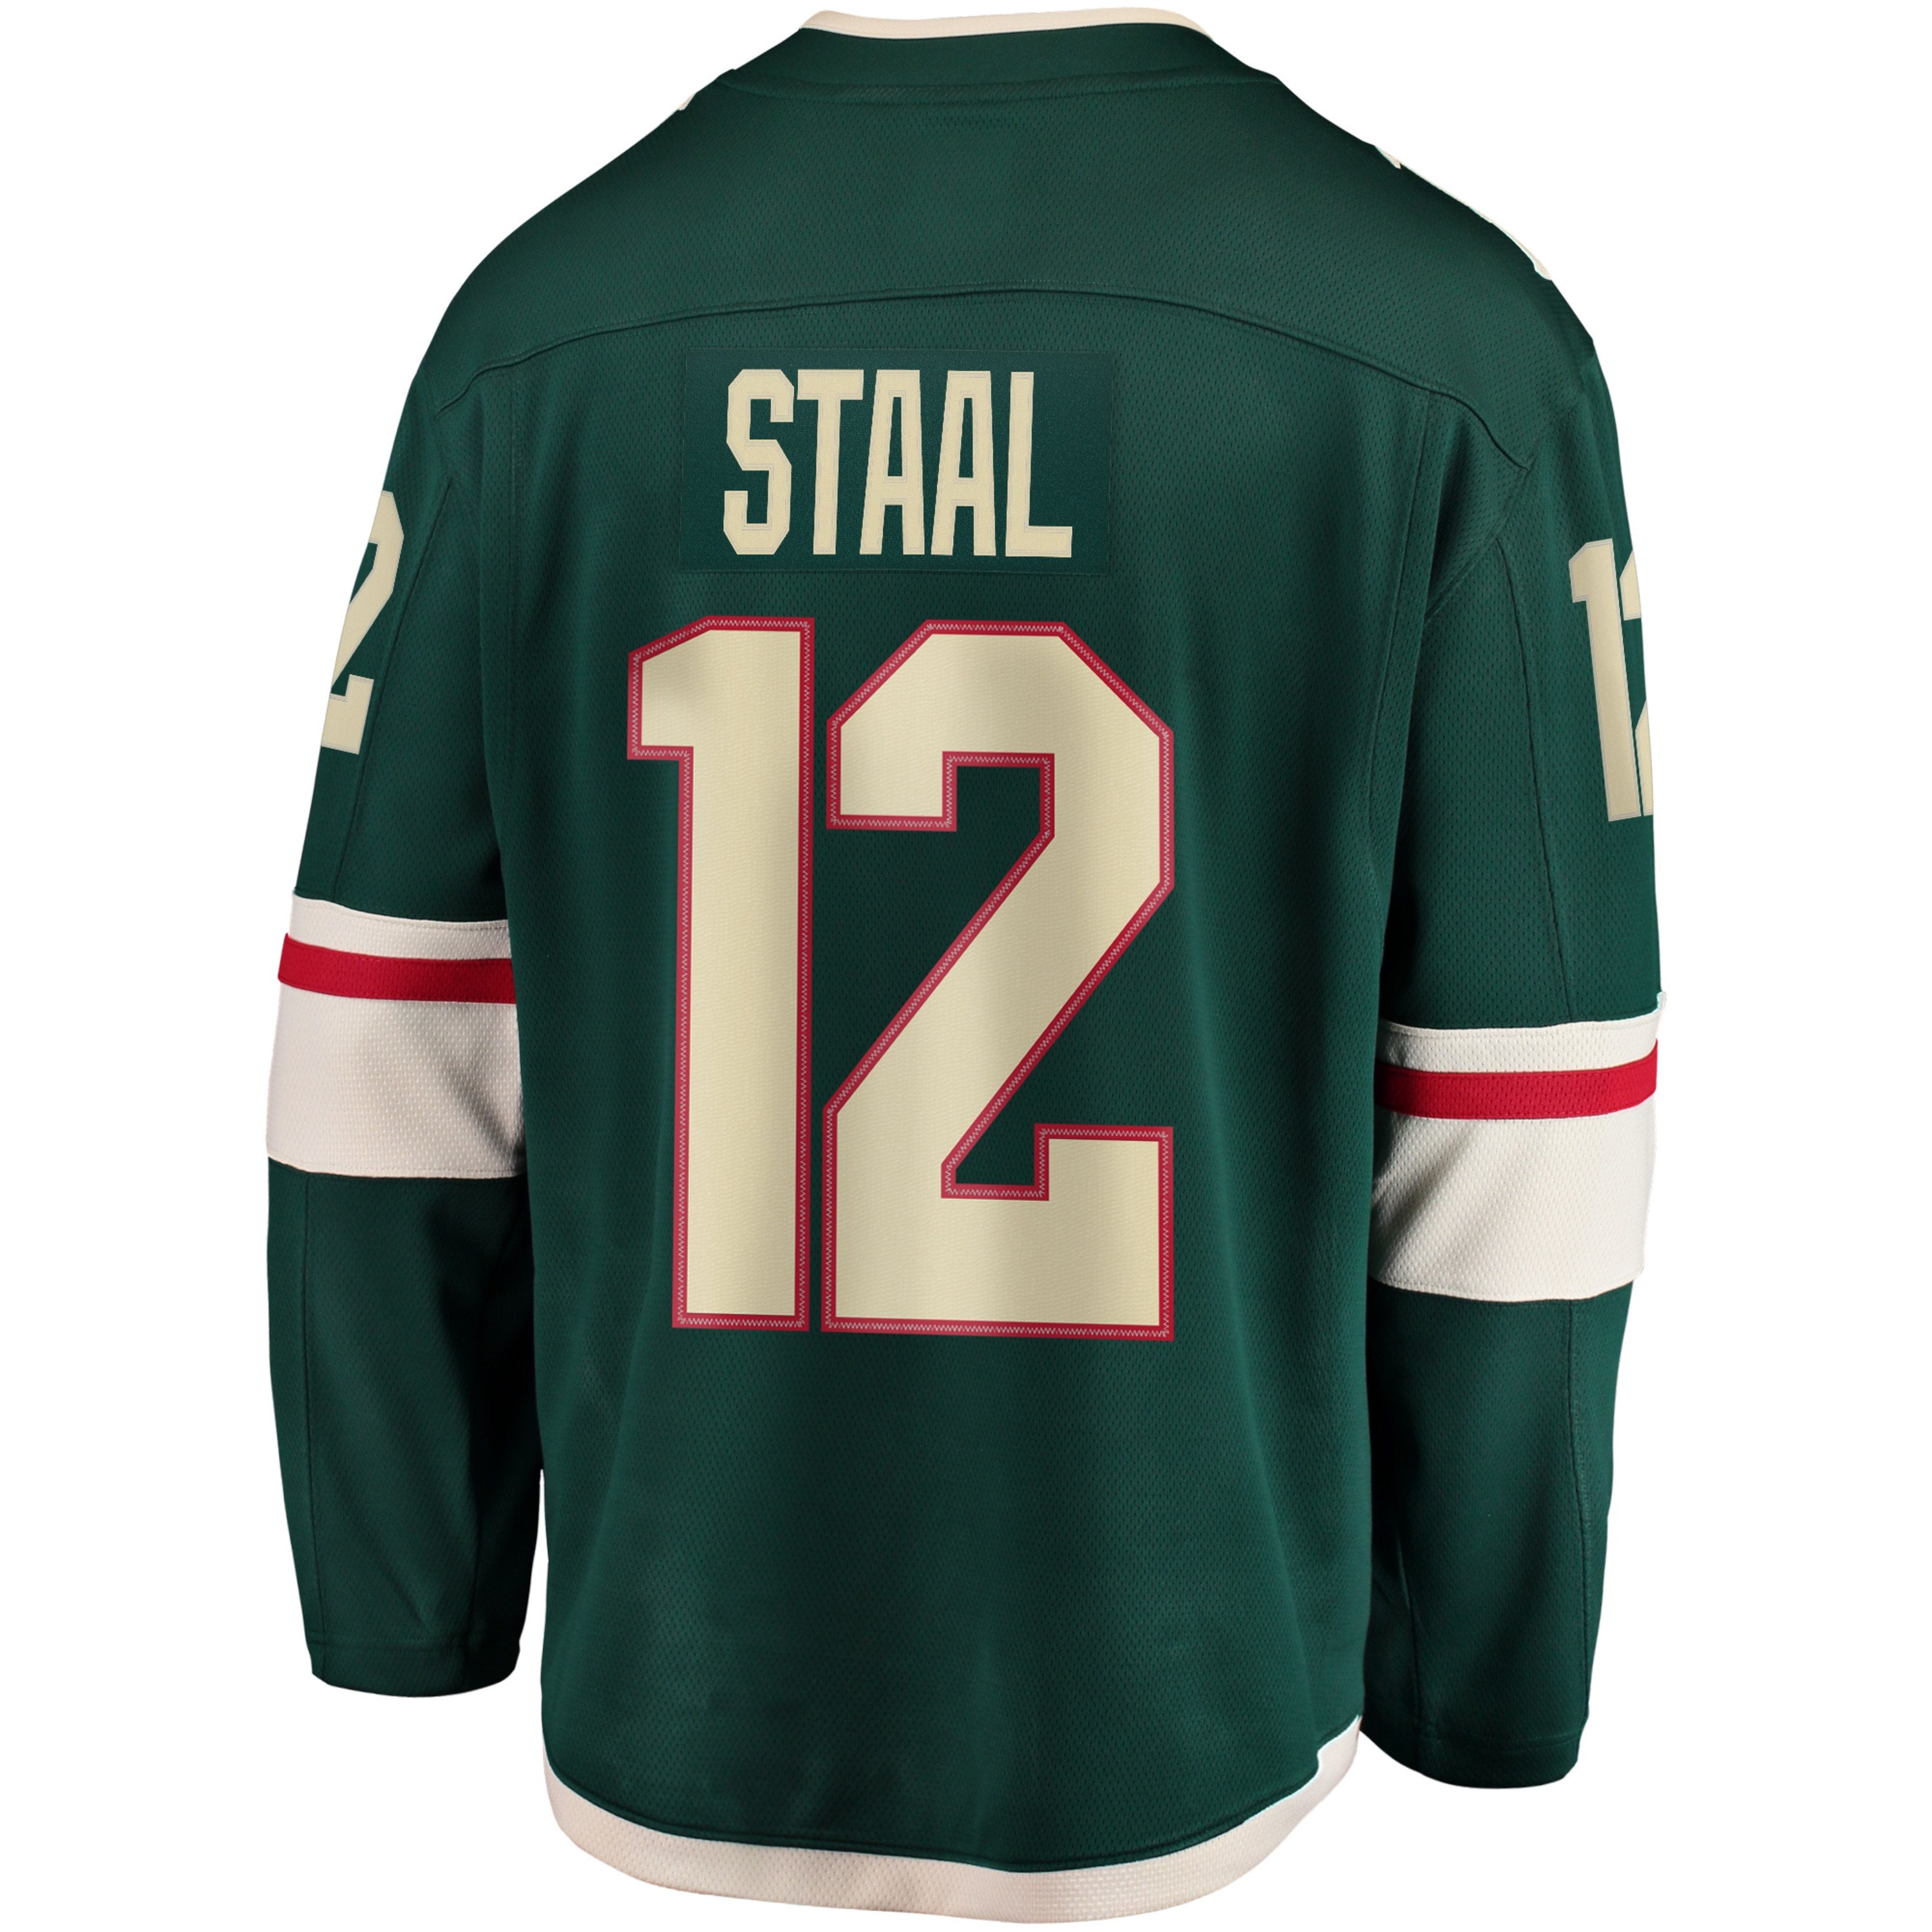 eric staal jersey wild